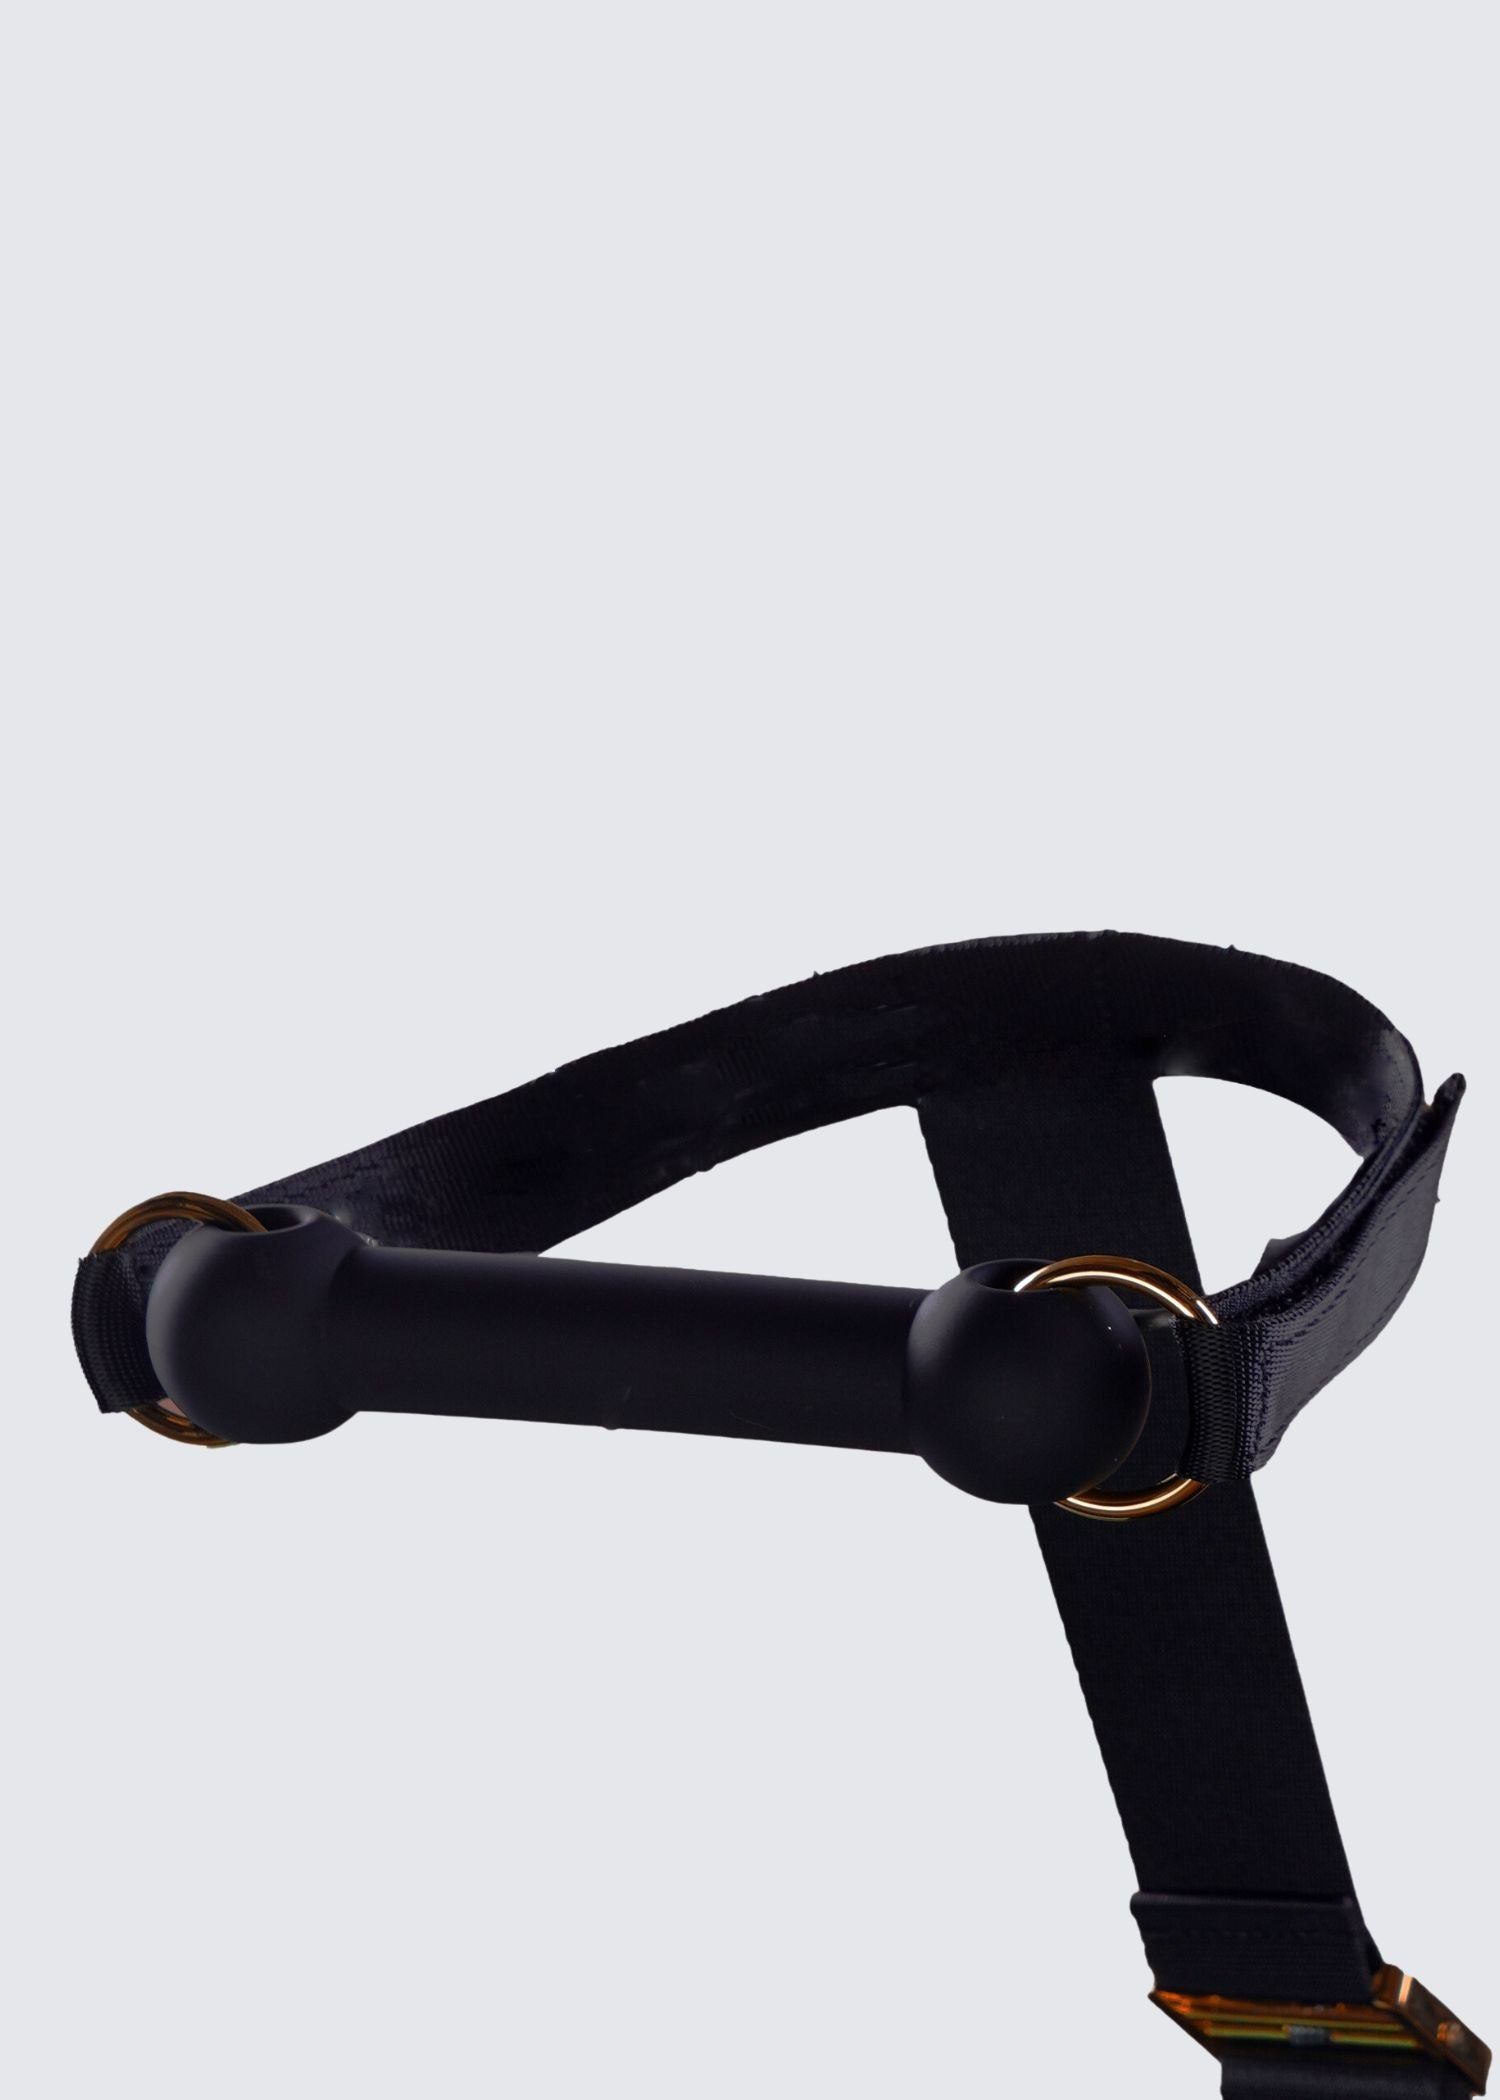 Binding Cuffs with Gag Ball (Black) | Avec Amour